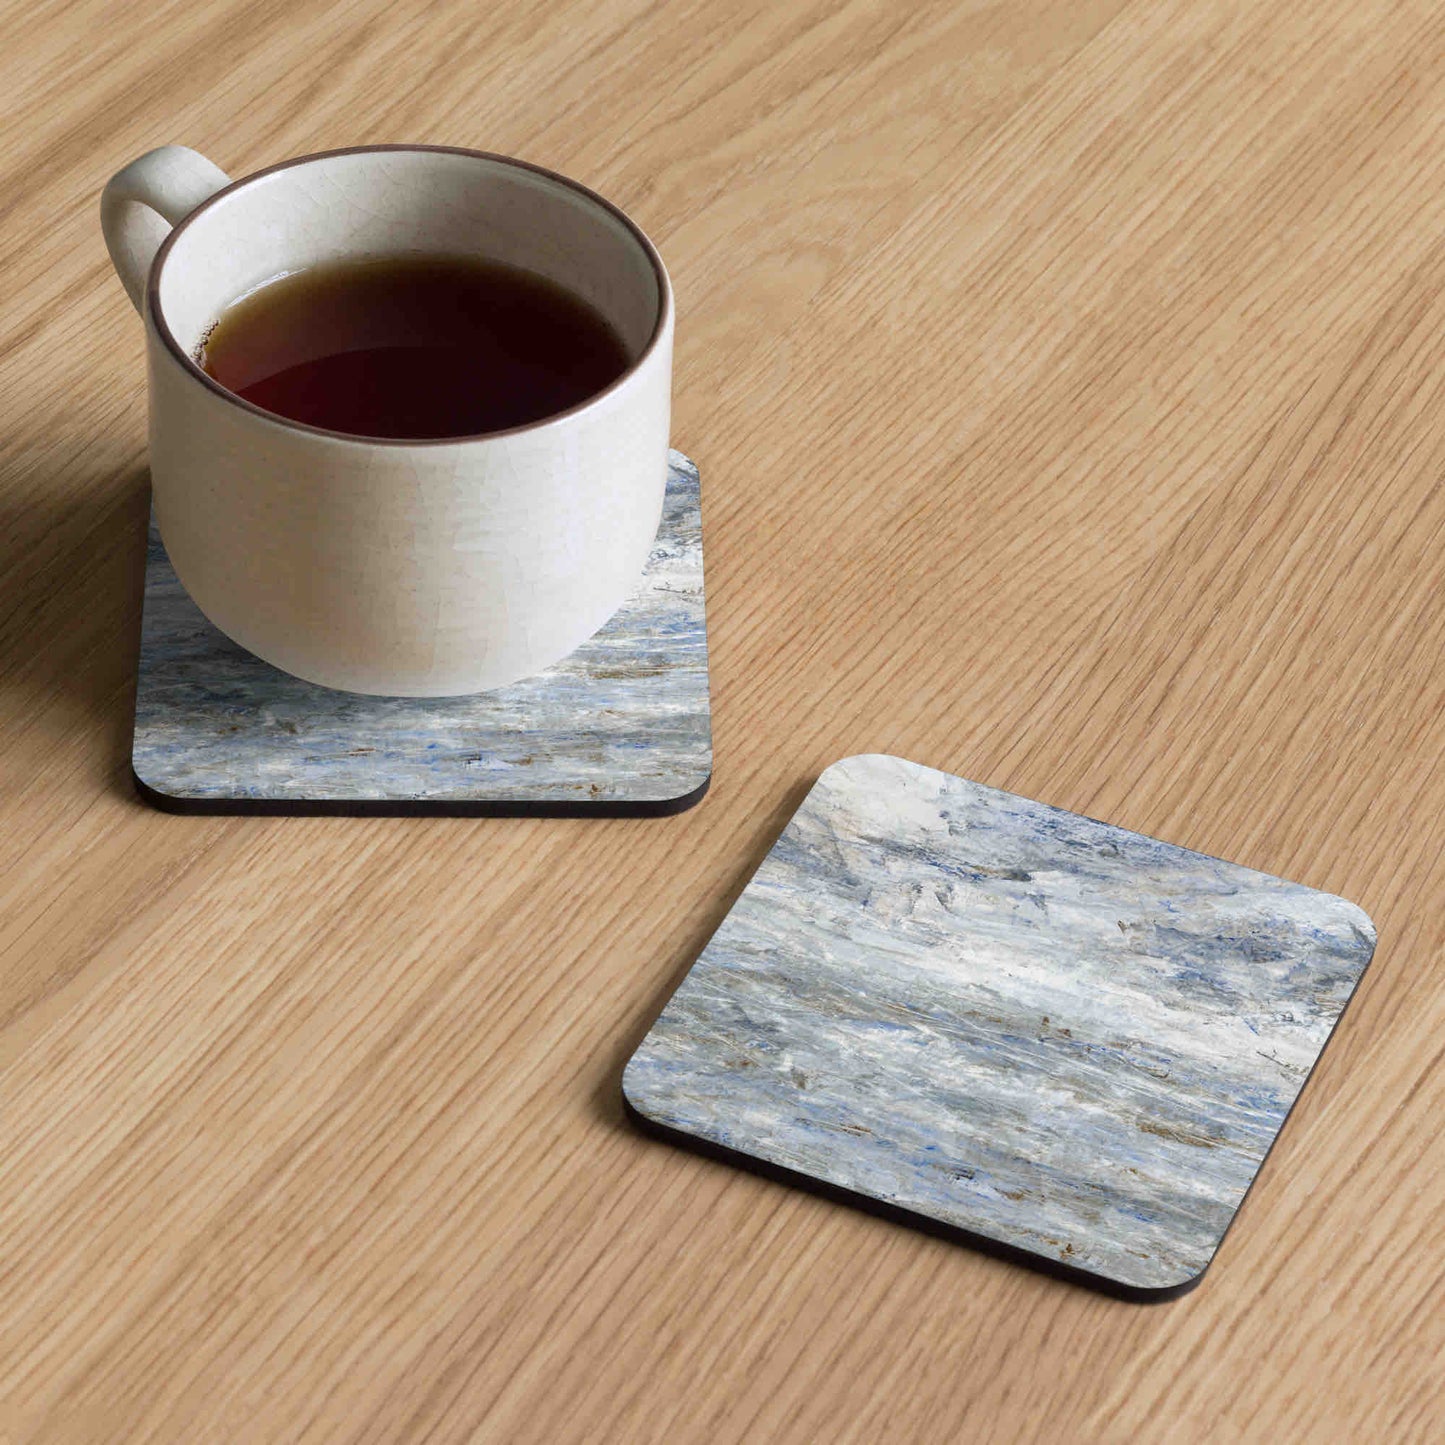 Grey Abstract Seascape Coasters - Ocean Coastal Decor - Grey Home Accents - Neutral Colour Drinks Coasters - New Home Housewarming Gift Ideas